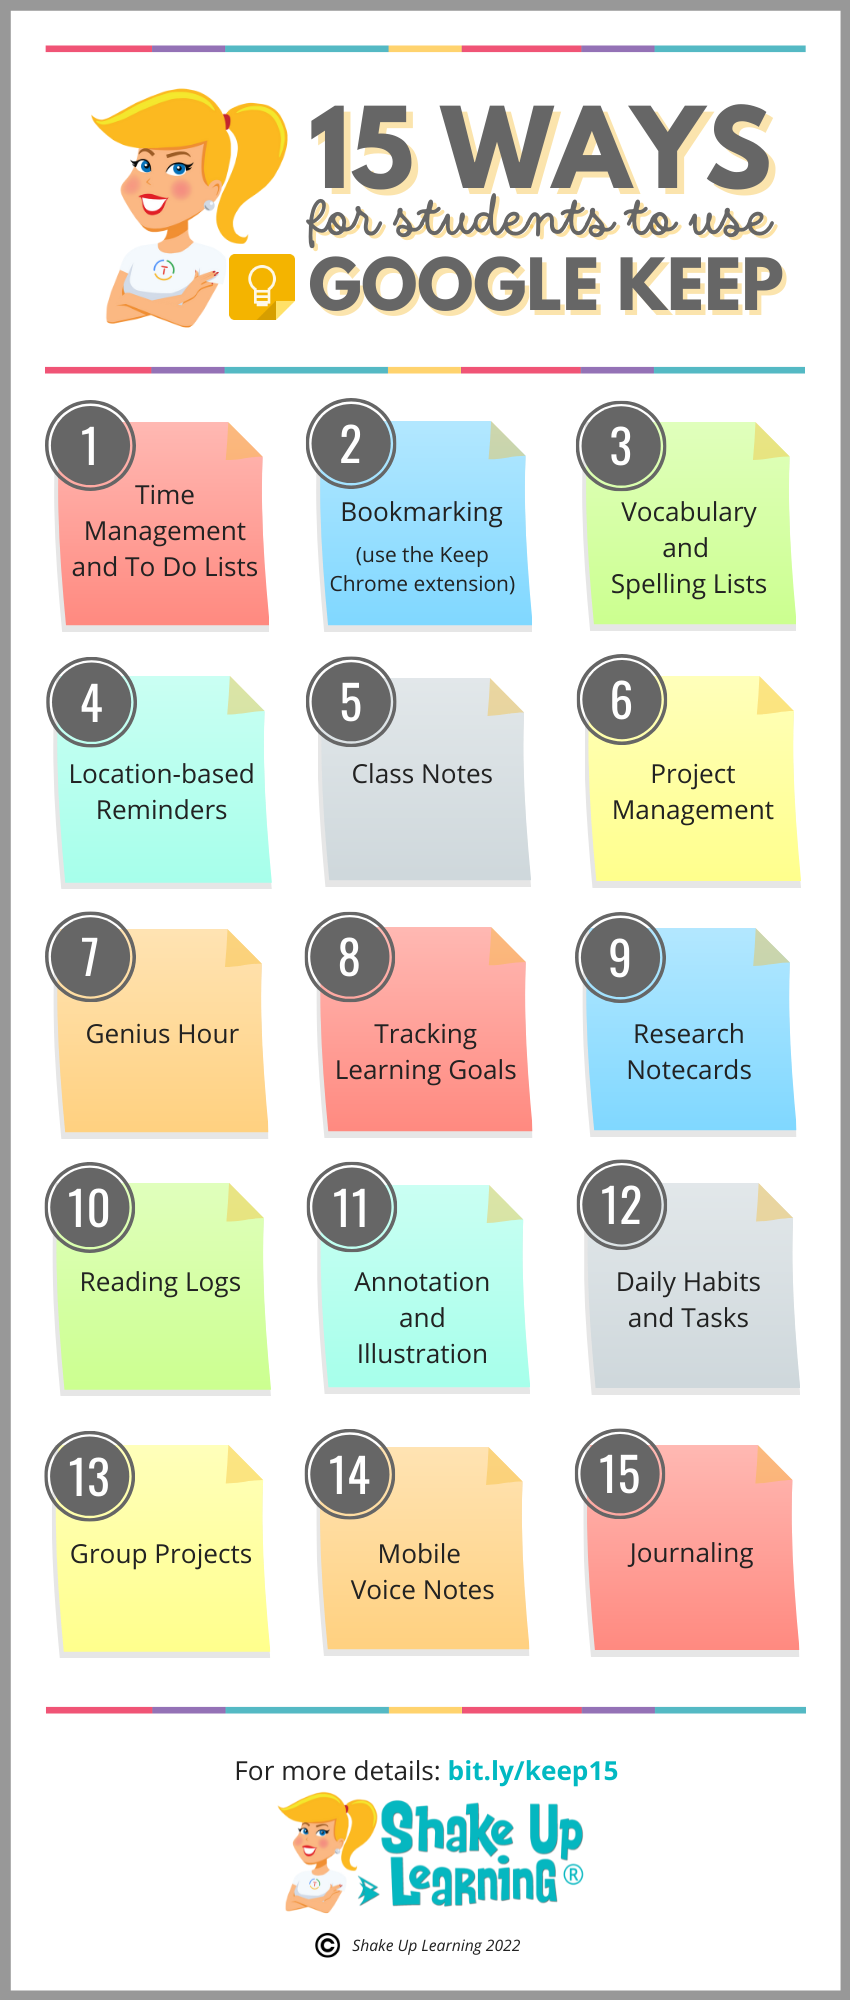 15 Ways for Students to Use Google Keep [infographic]